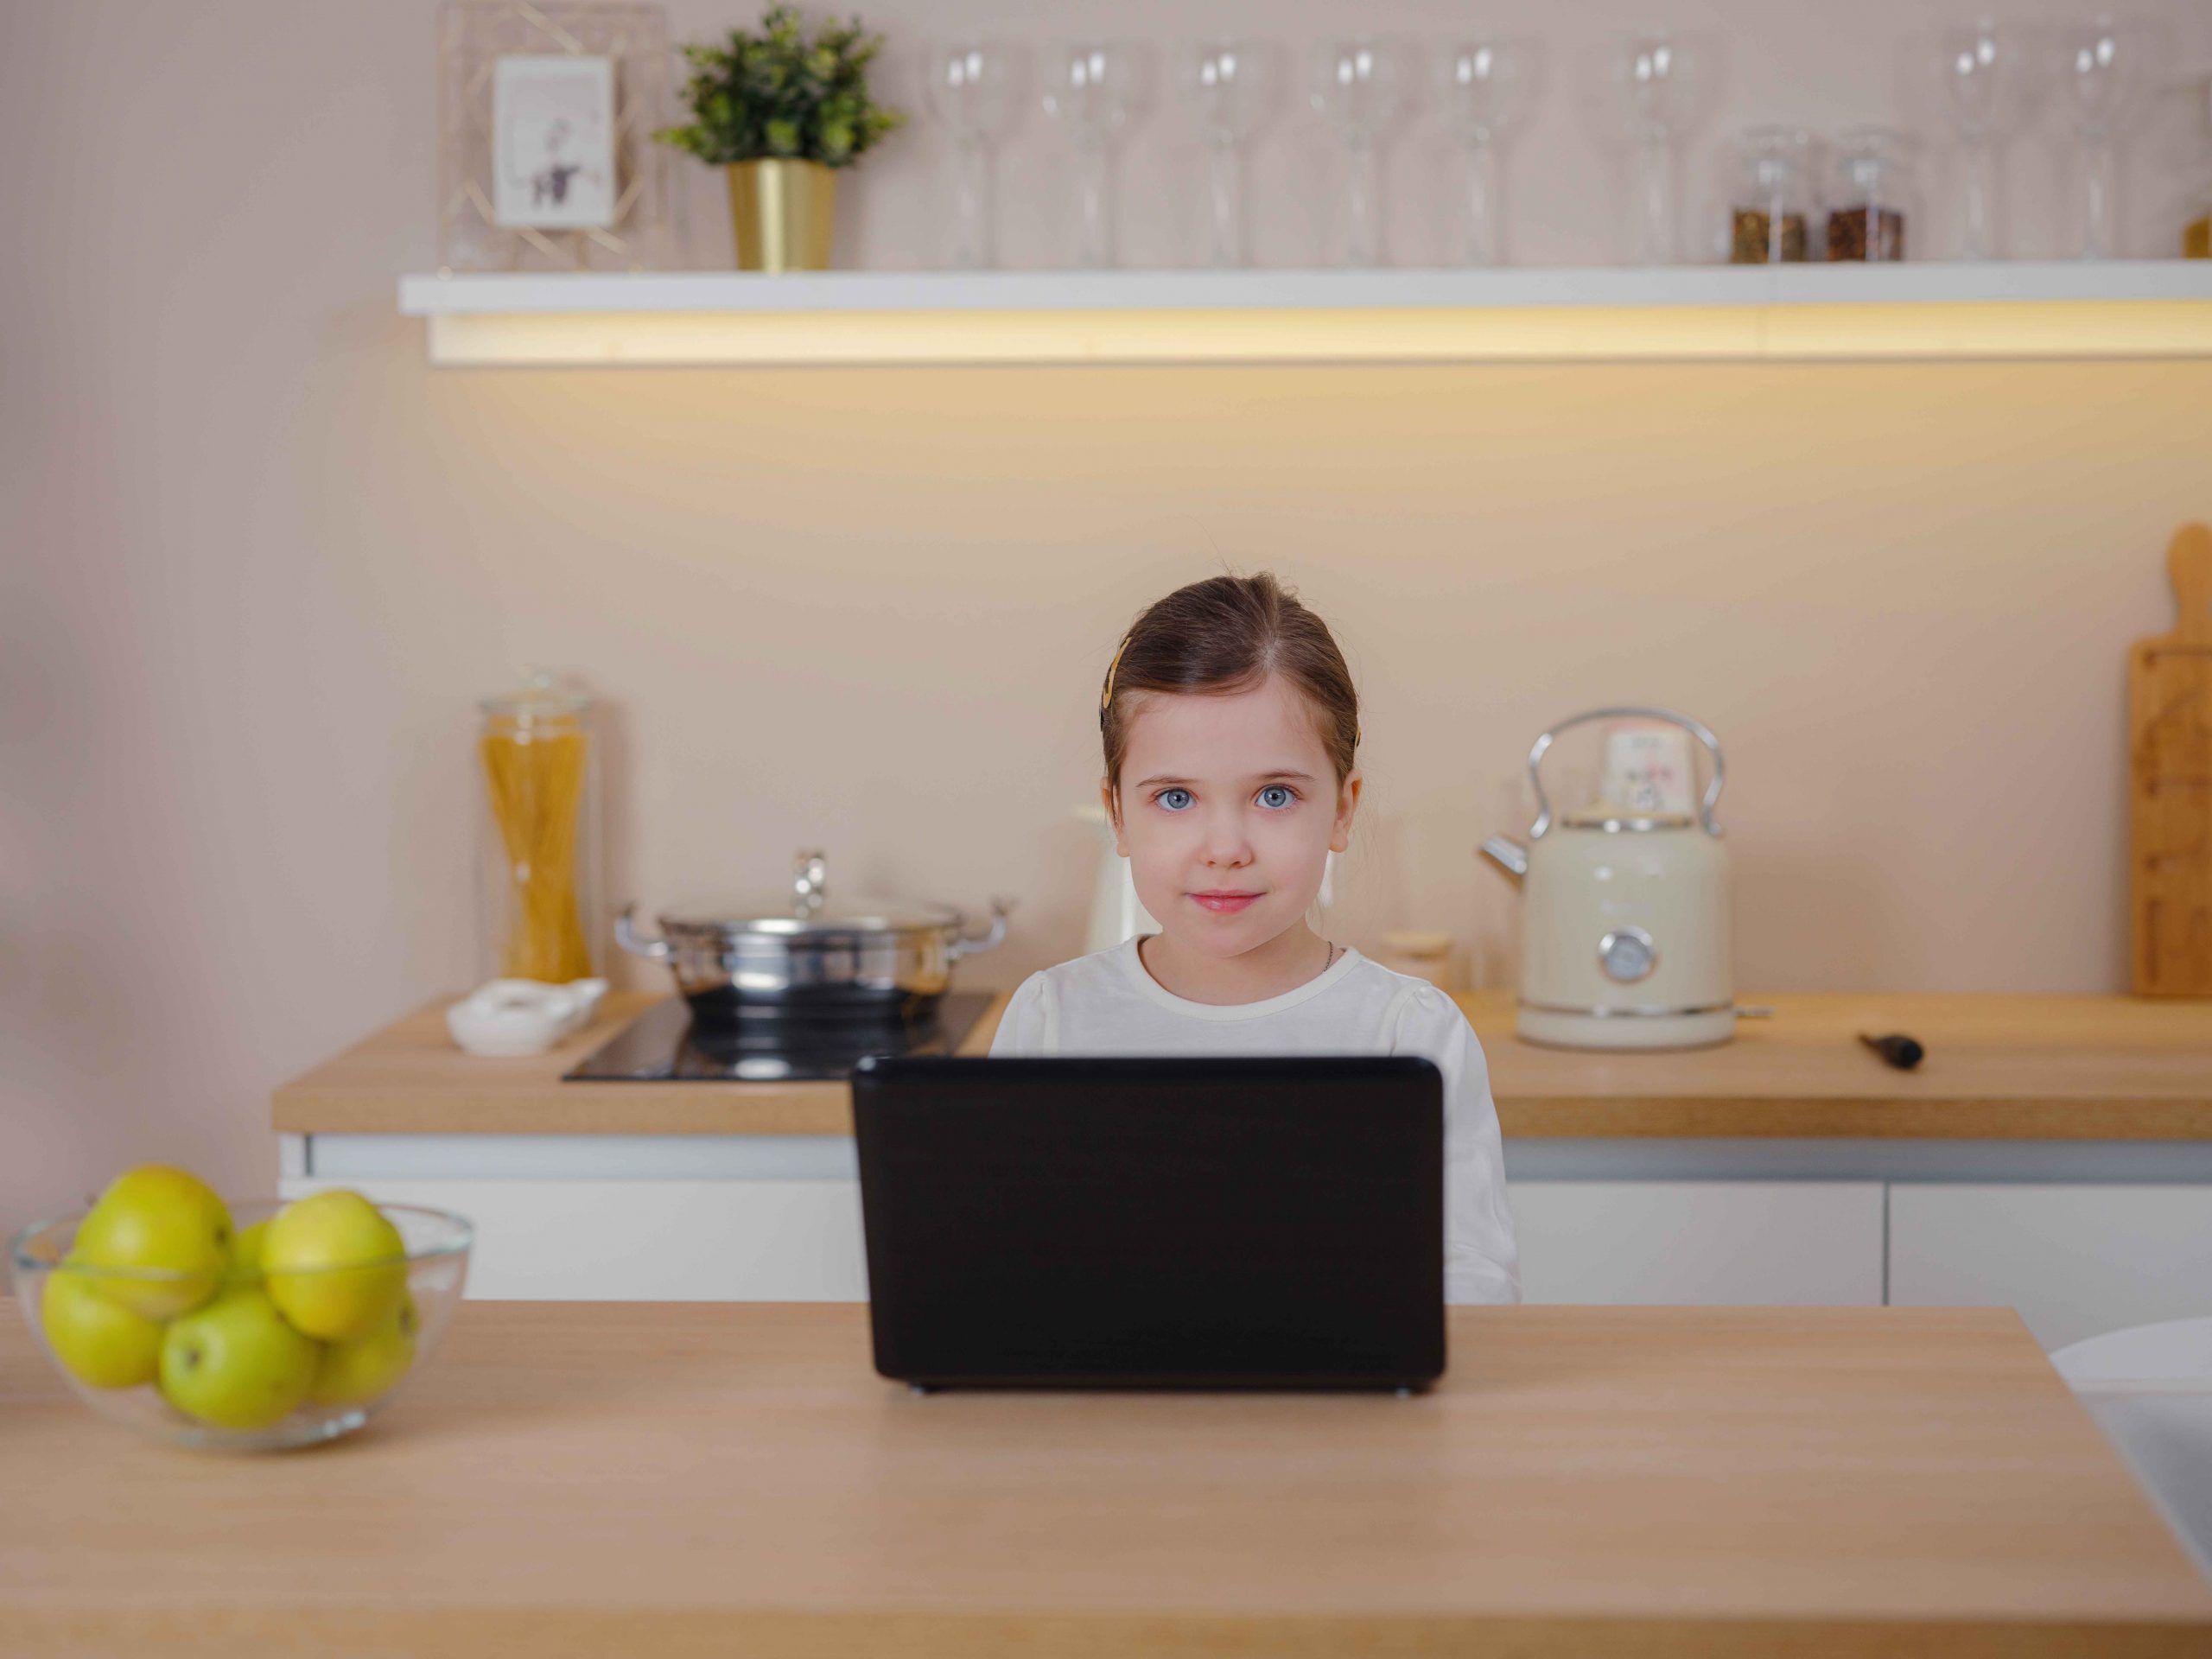 child-coding-in-front-of-laptop-in-kitchen-2022-11-15-14-58-58-utc_5_11zon